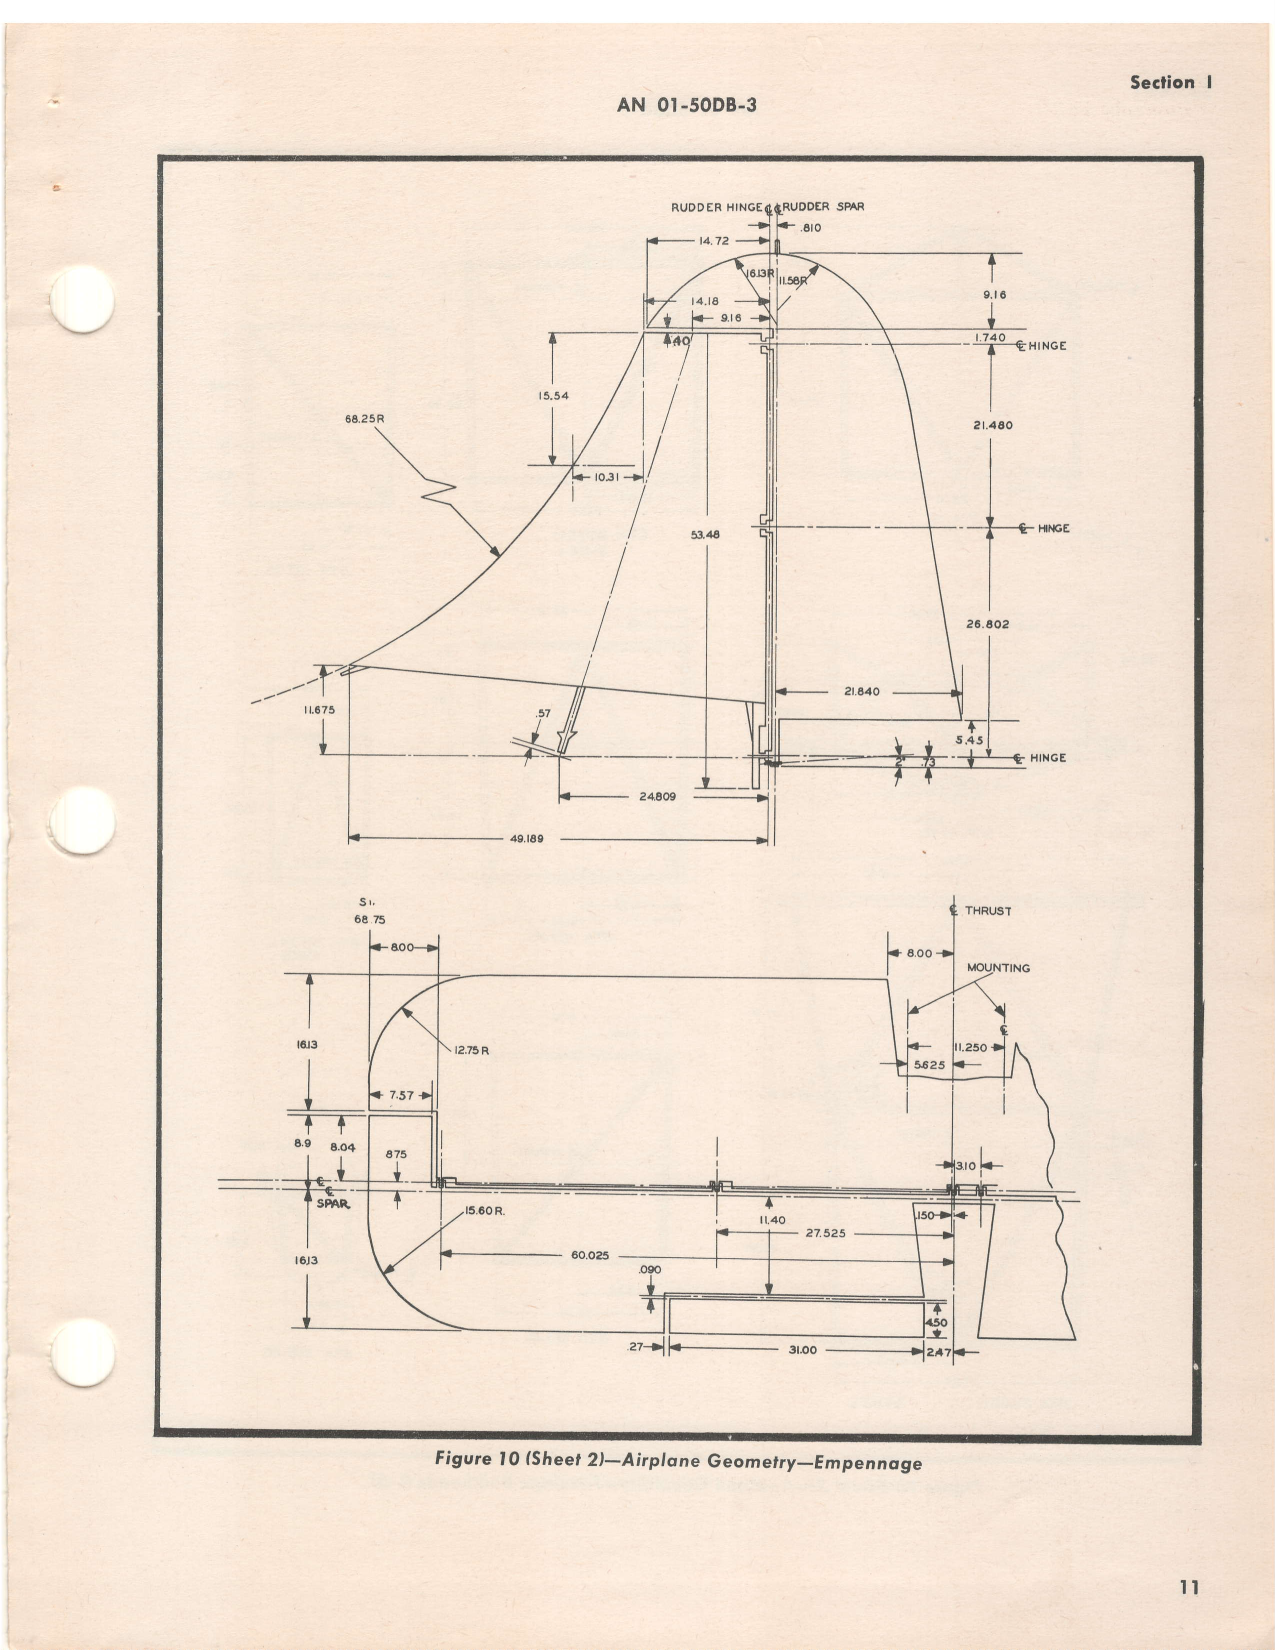 Sample page 17 from AirCorps Library document: Structural Repair Instructions - L-5 OY-1 OY-2